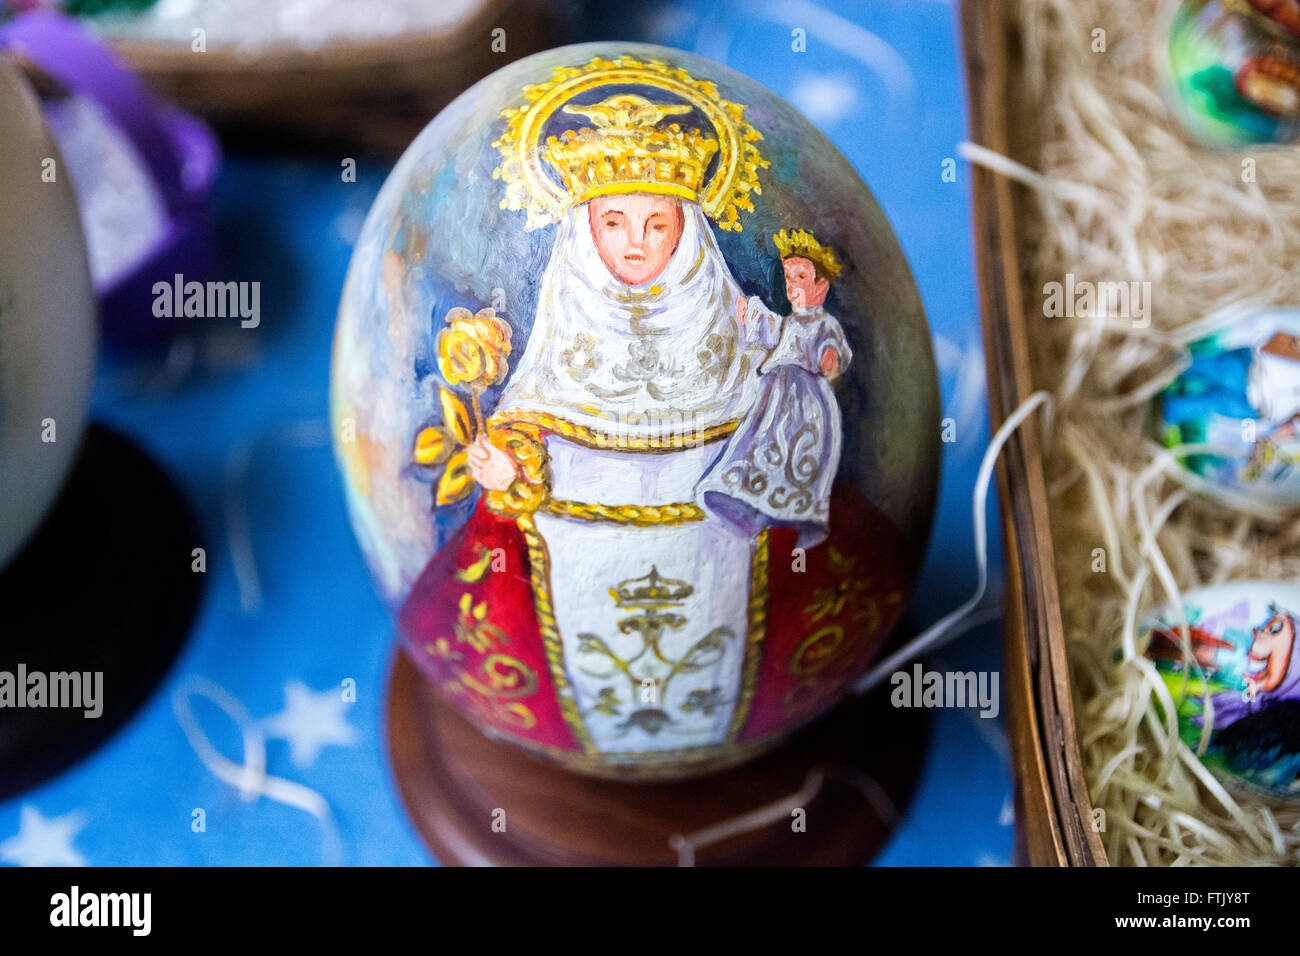 Pola de Siero, Spain. 29th March, 2016. A painted goose egg which represents the Virgin of Covadonga pictured at the Feast of Easter Eggs of Pola de Siero, the only Spanish city in which this feast is celebrated, on the first Tuesday after Easter Sunday, with thousands of eggs painted by hand. © David Gato/Alamy Live News Stock Photo